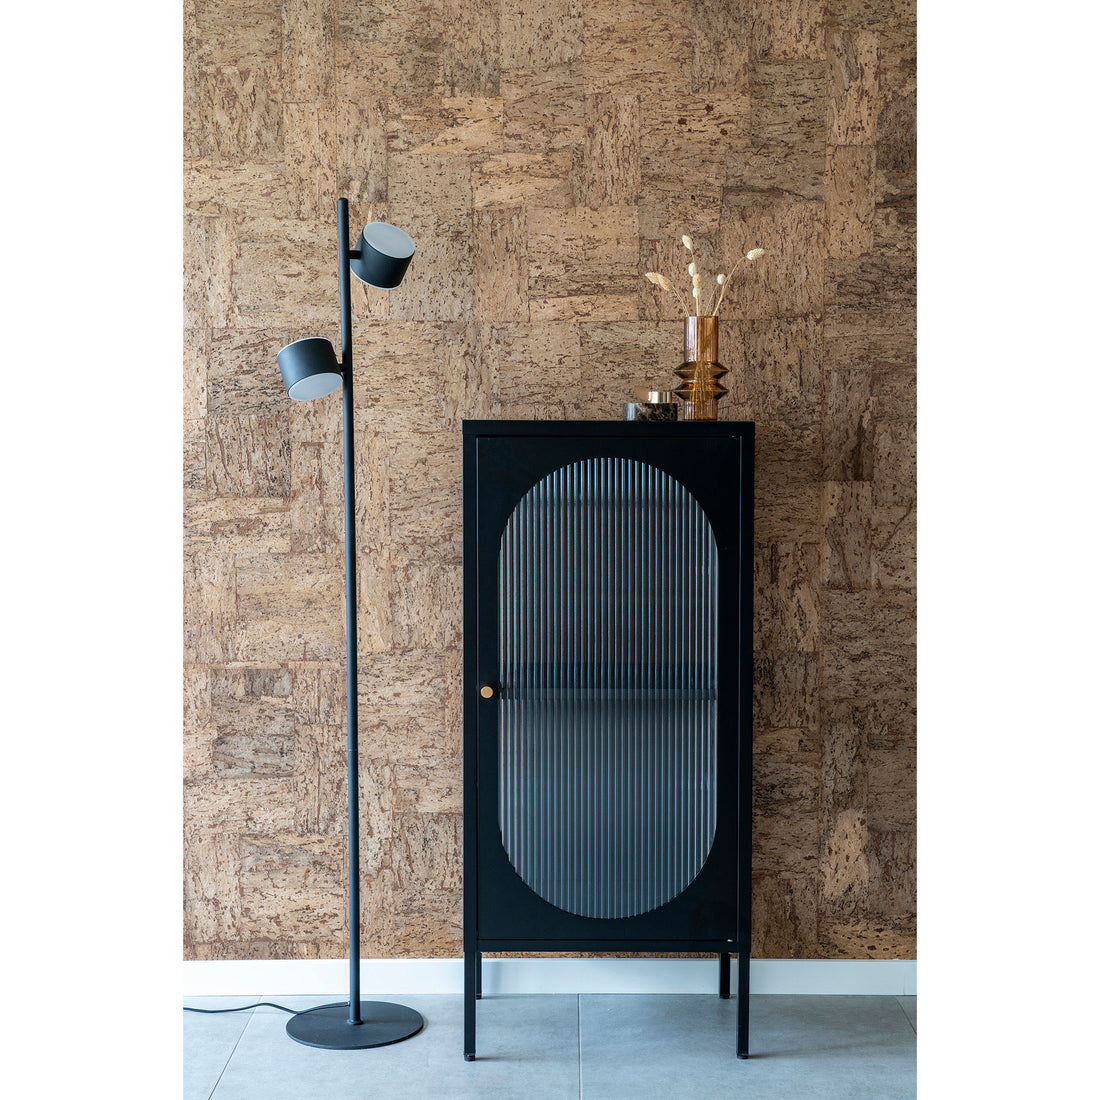 Adelaide display cabinet - display cabinet in black with rifled glass door 35x50x110 cm - 1 - pcs